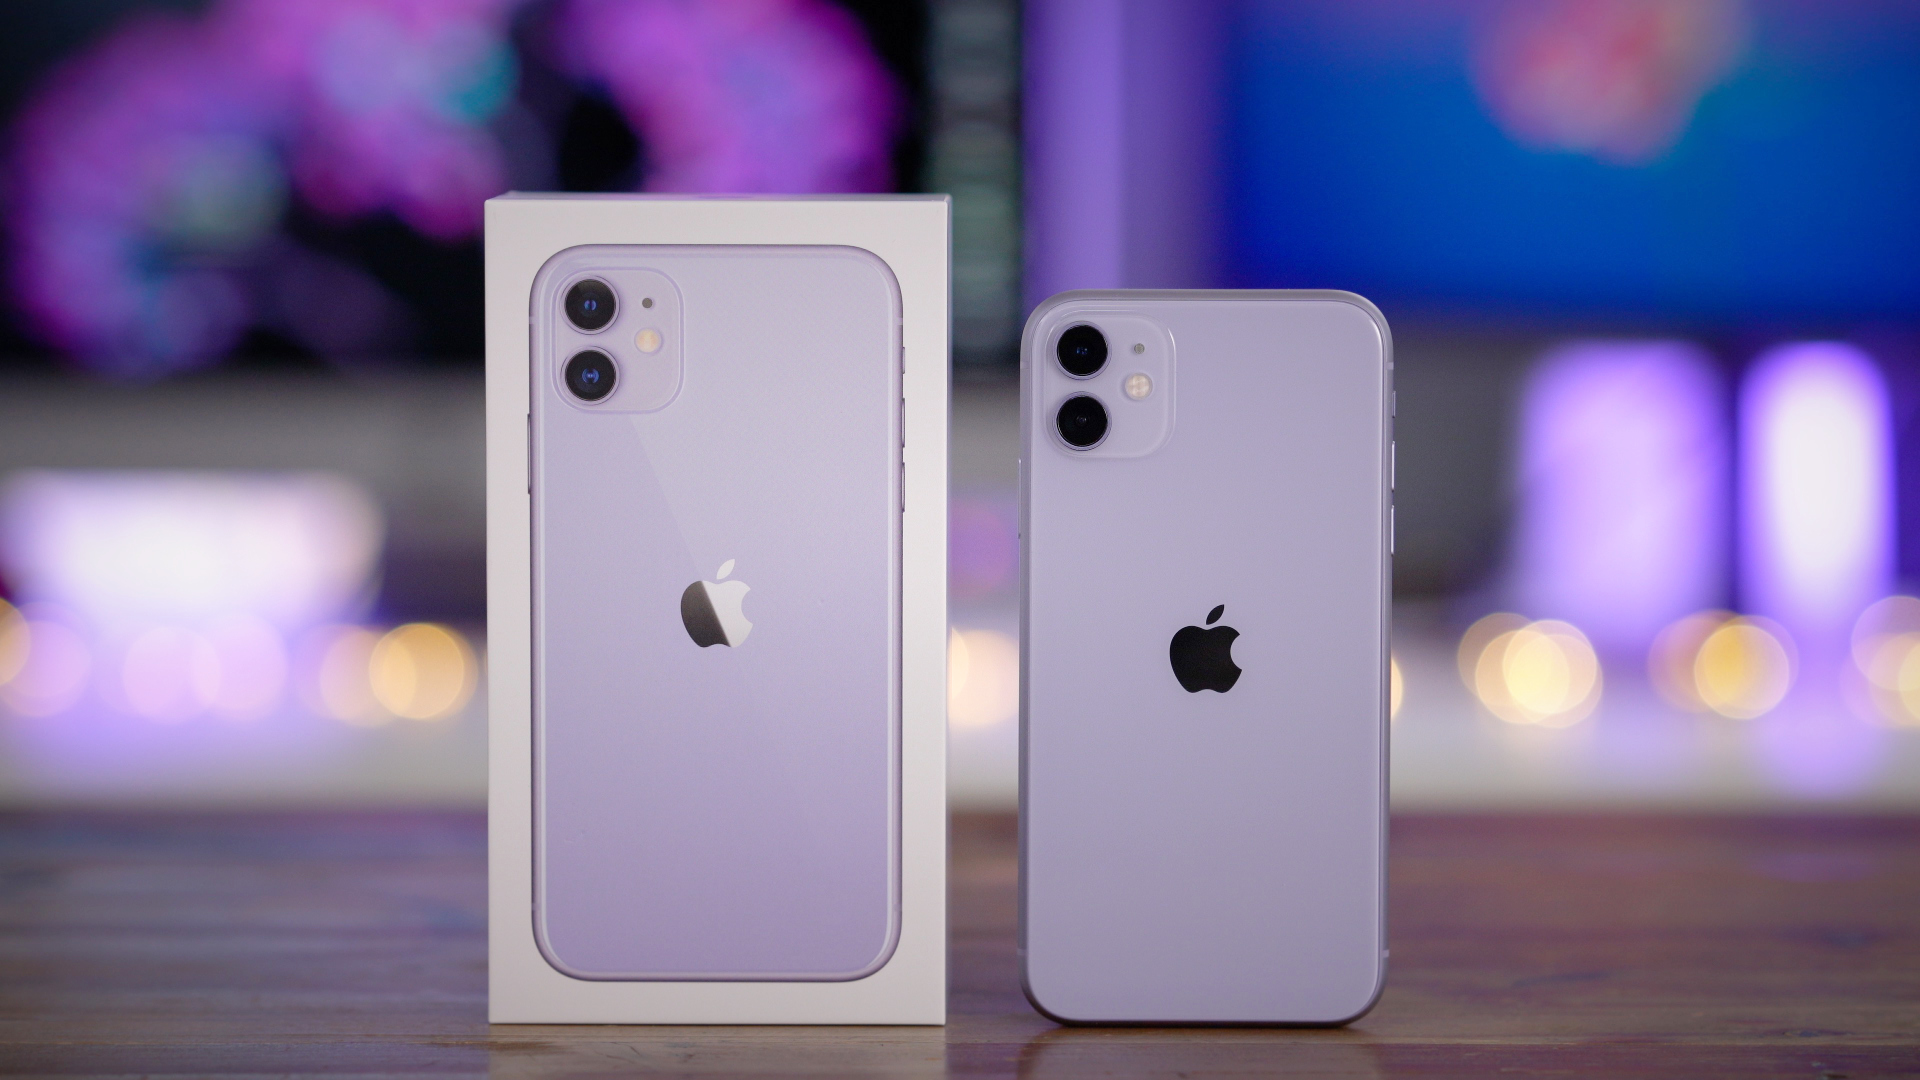 Top Iphone 11 Features An Even Better Bang For The Buck Video 9to5mac